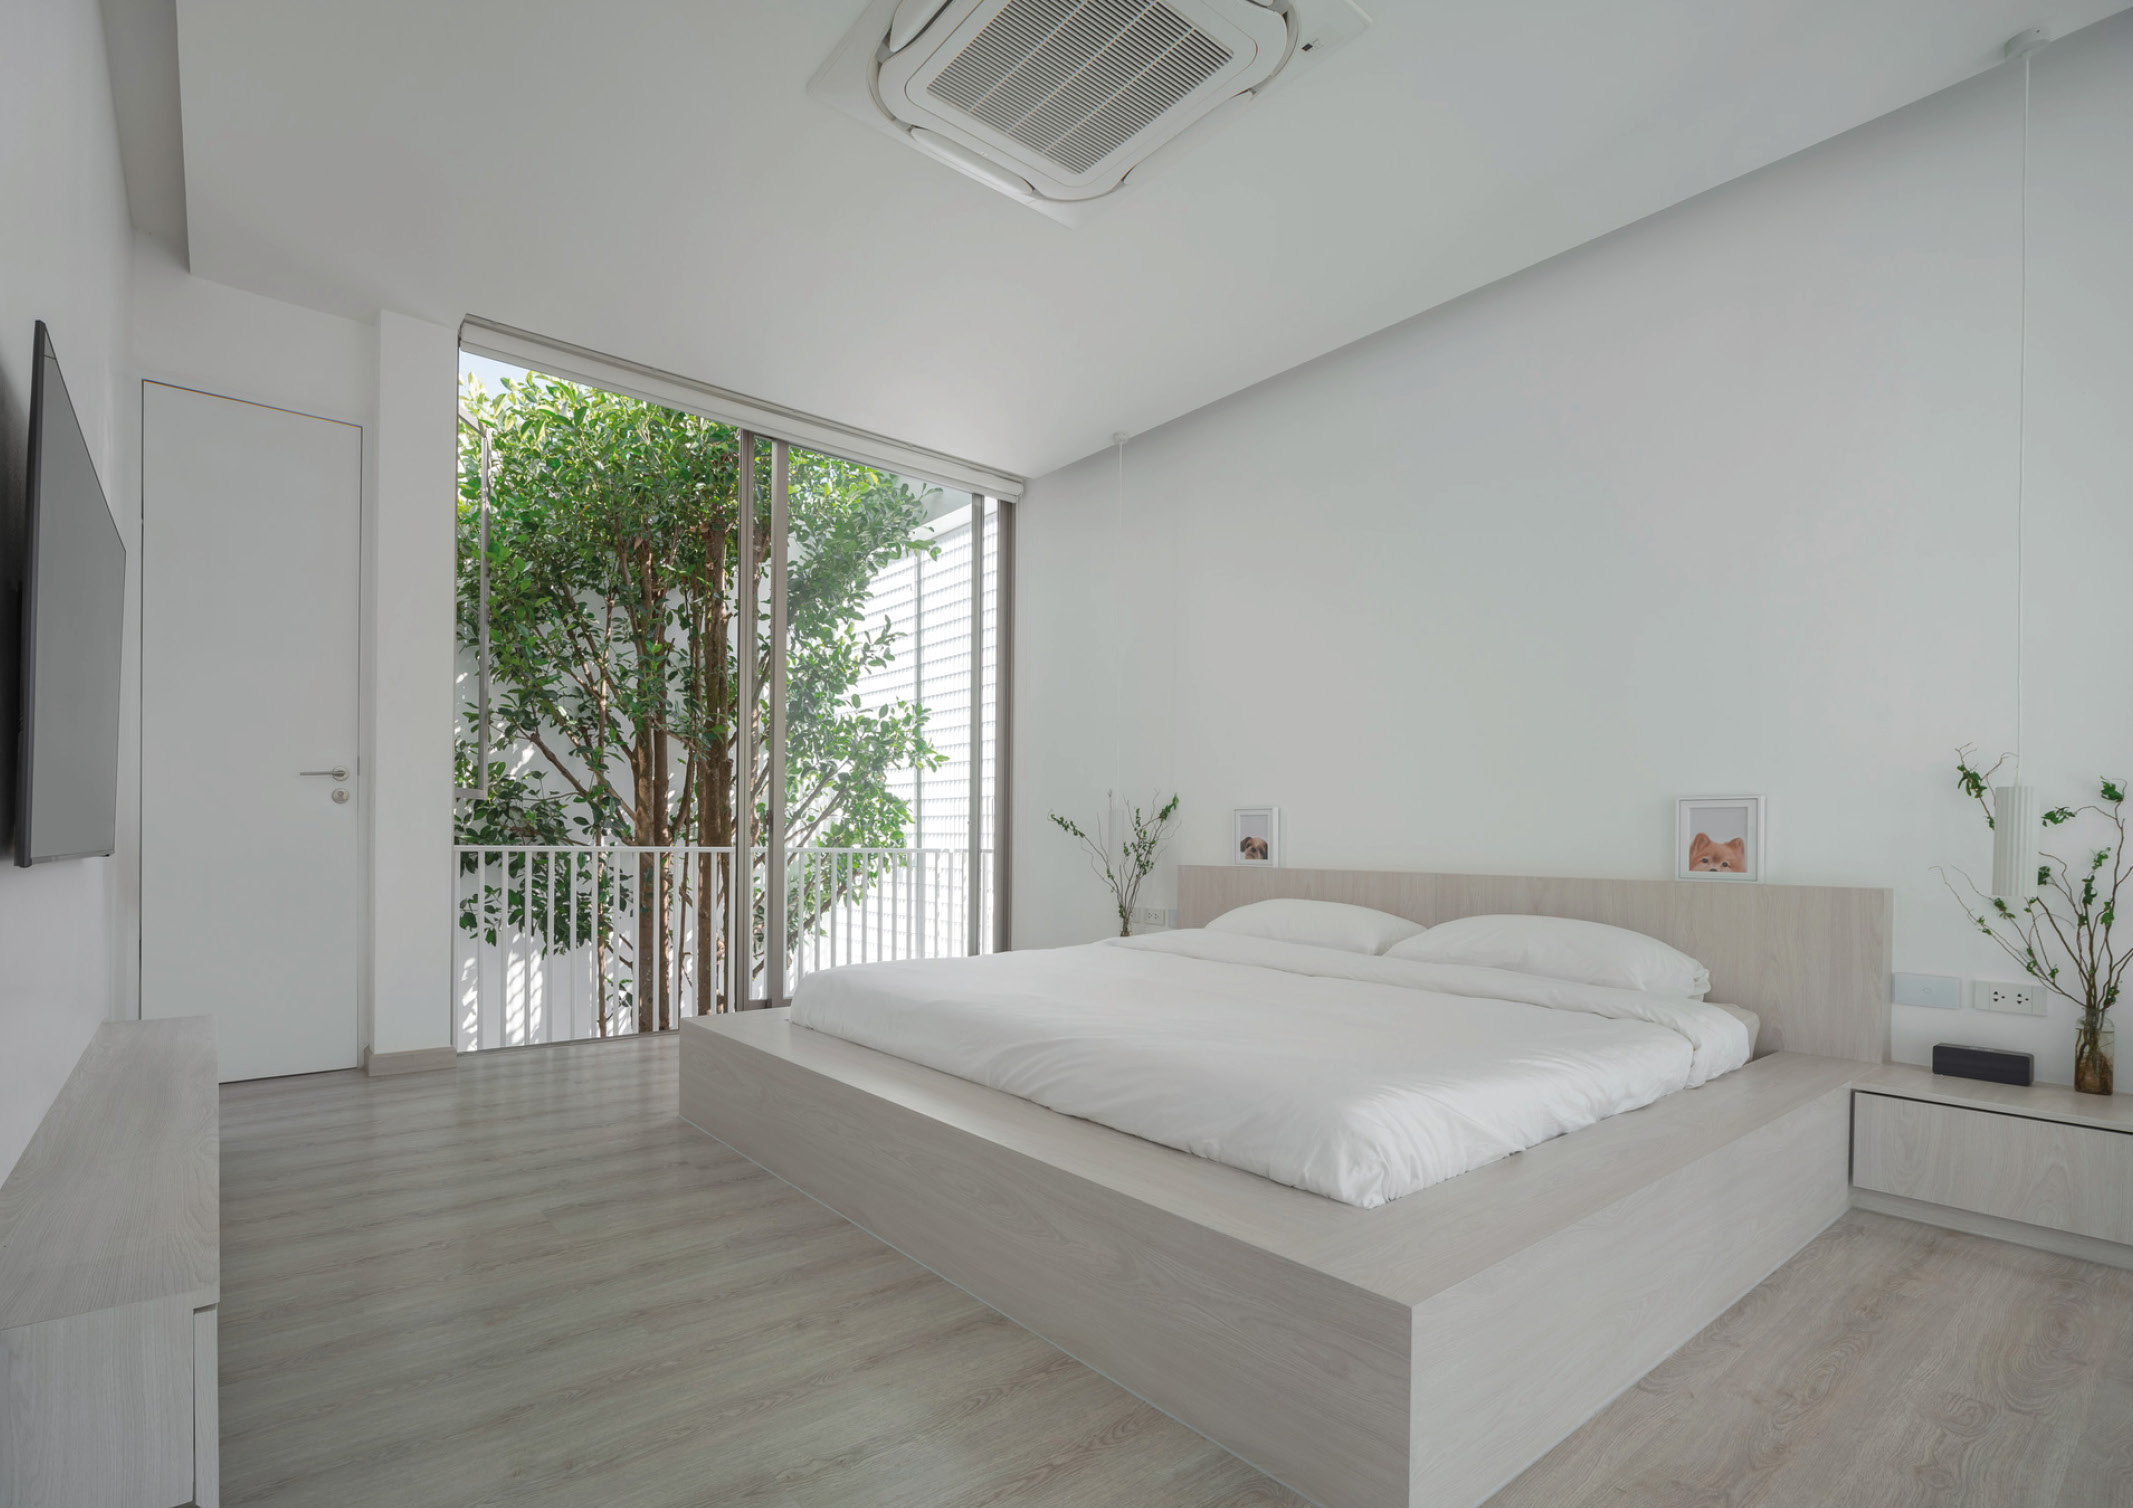 House C + I in Chiang Mai, Thailand Designed by Blank Studio